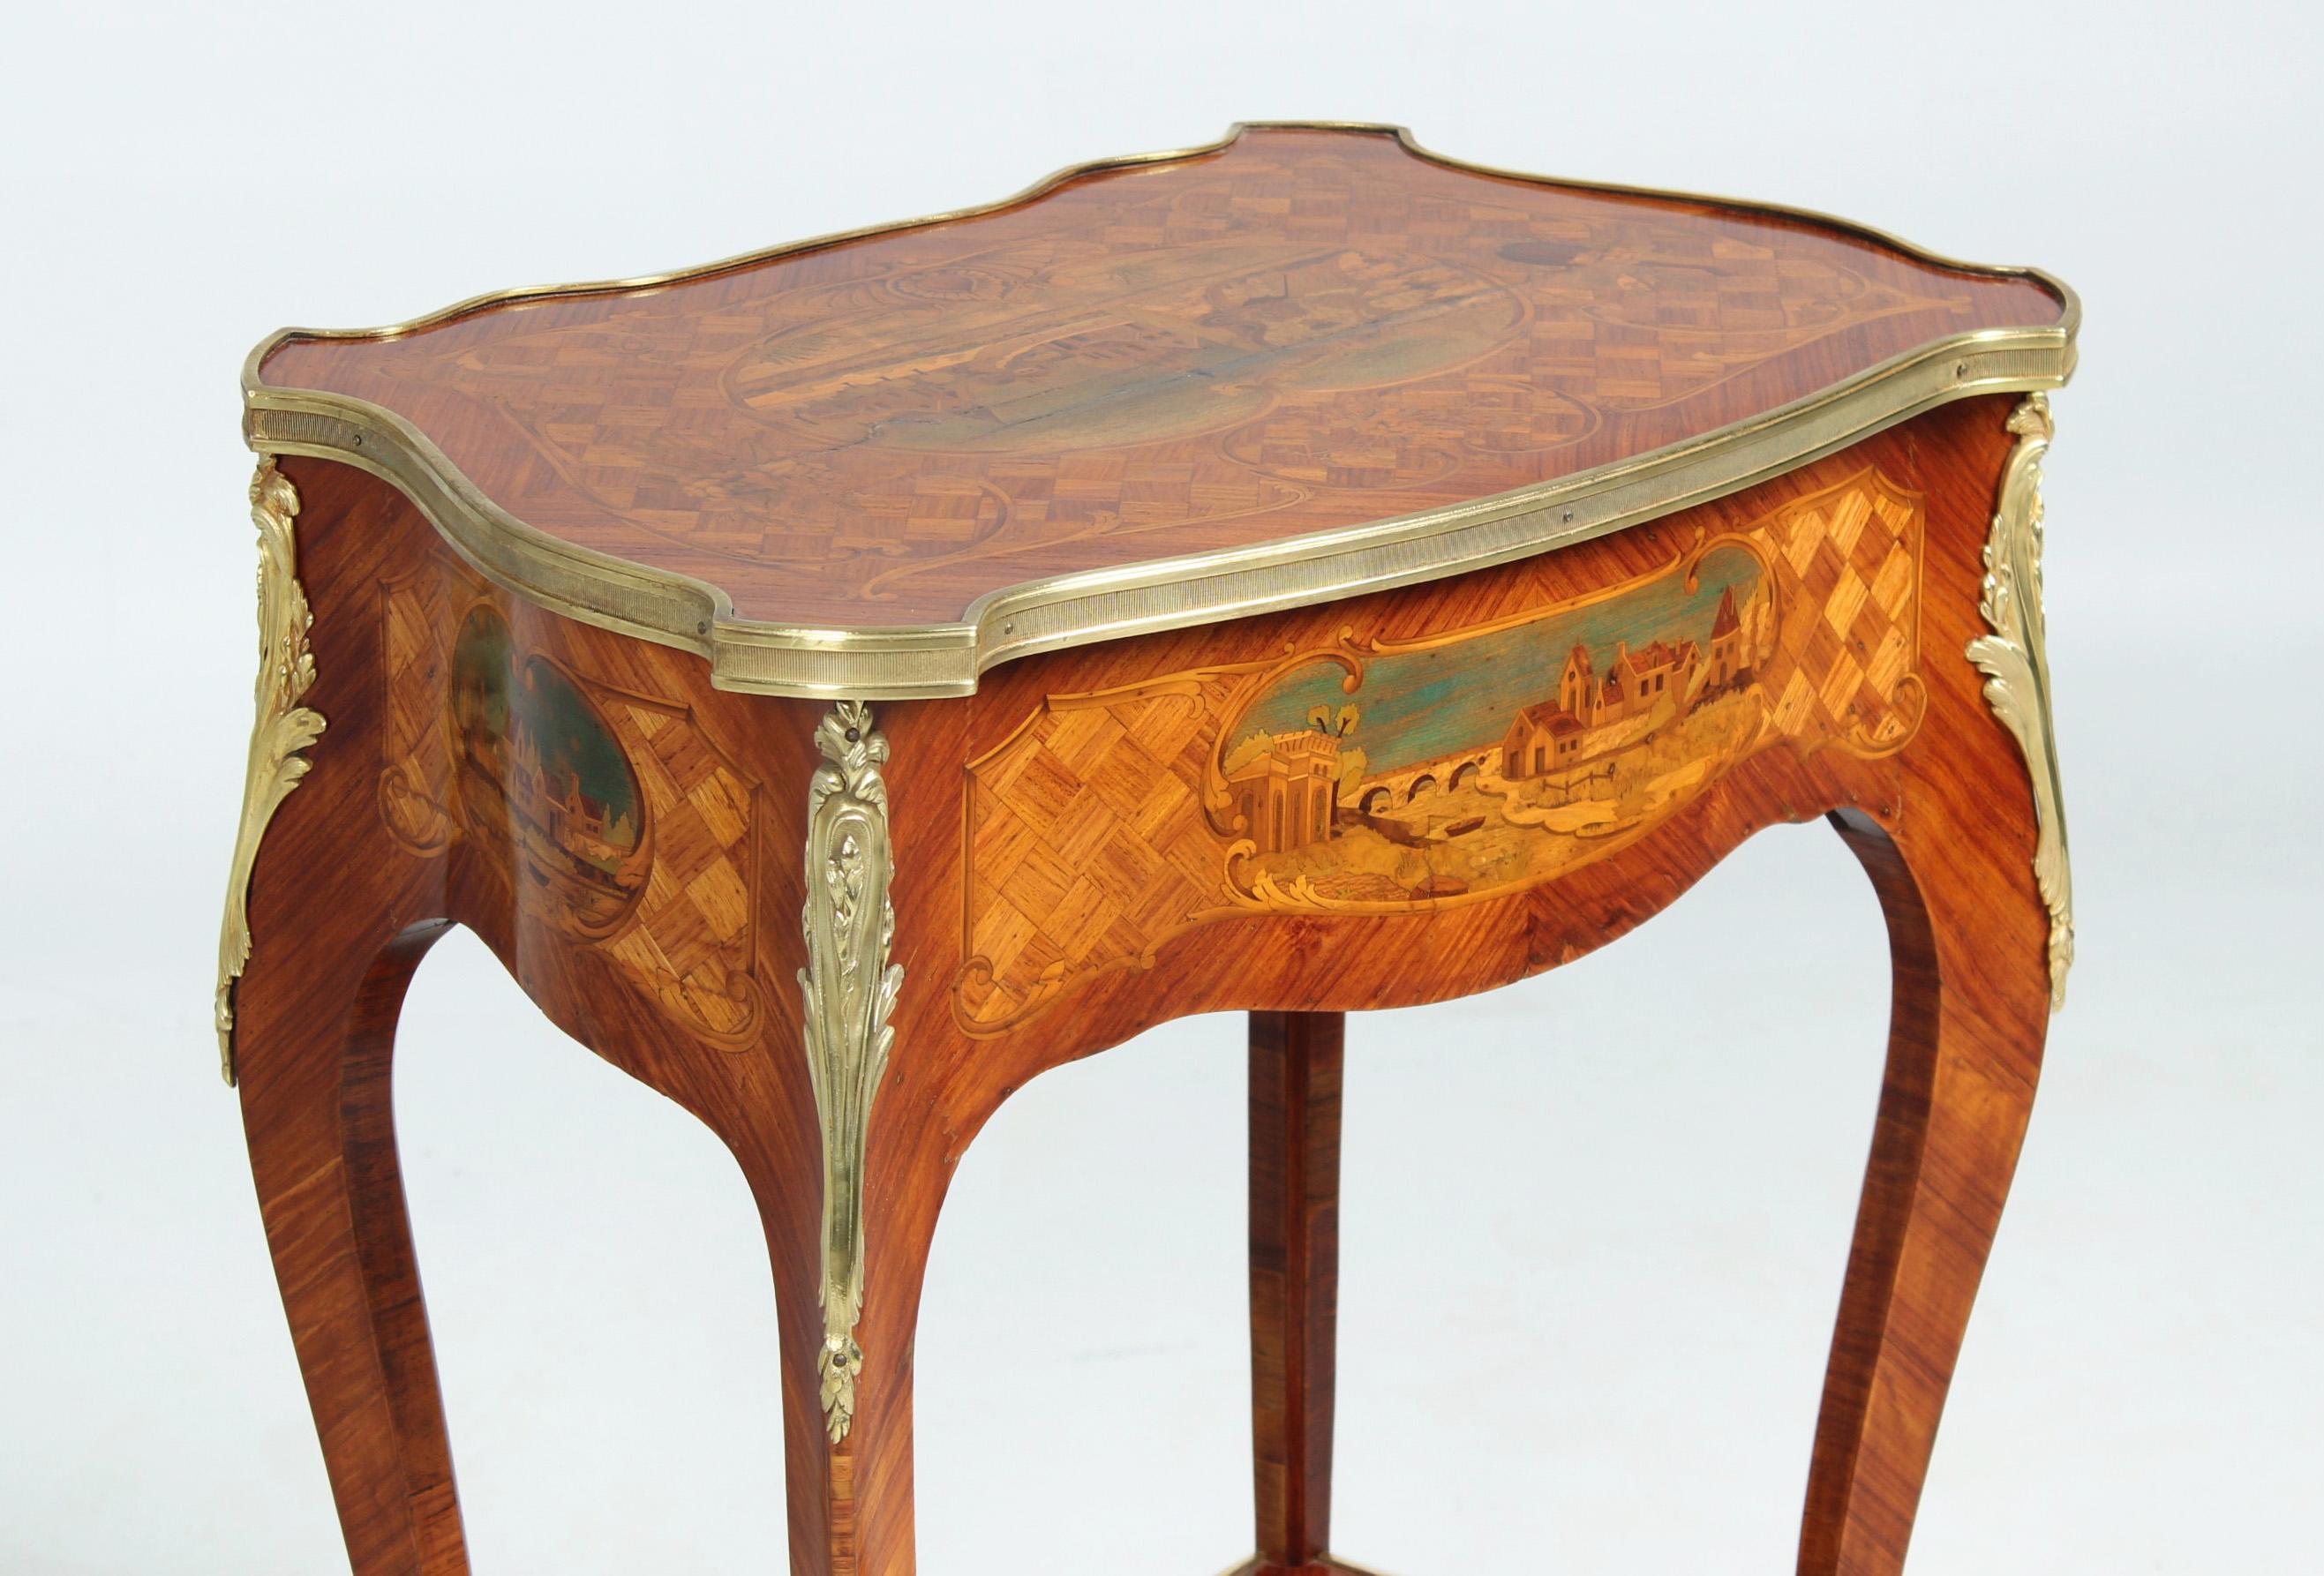  Ladies Desk with Fine Marquetry, Attributed to Beurdeley, Paris, circa 1880 For Sale 1